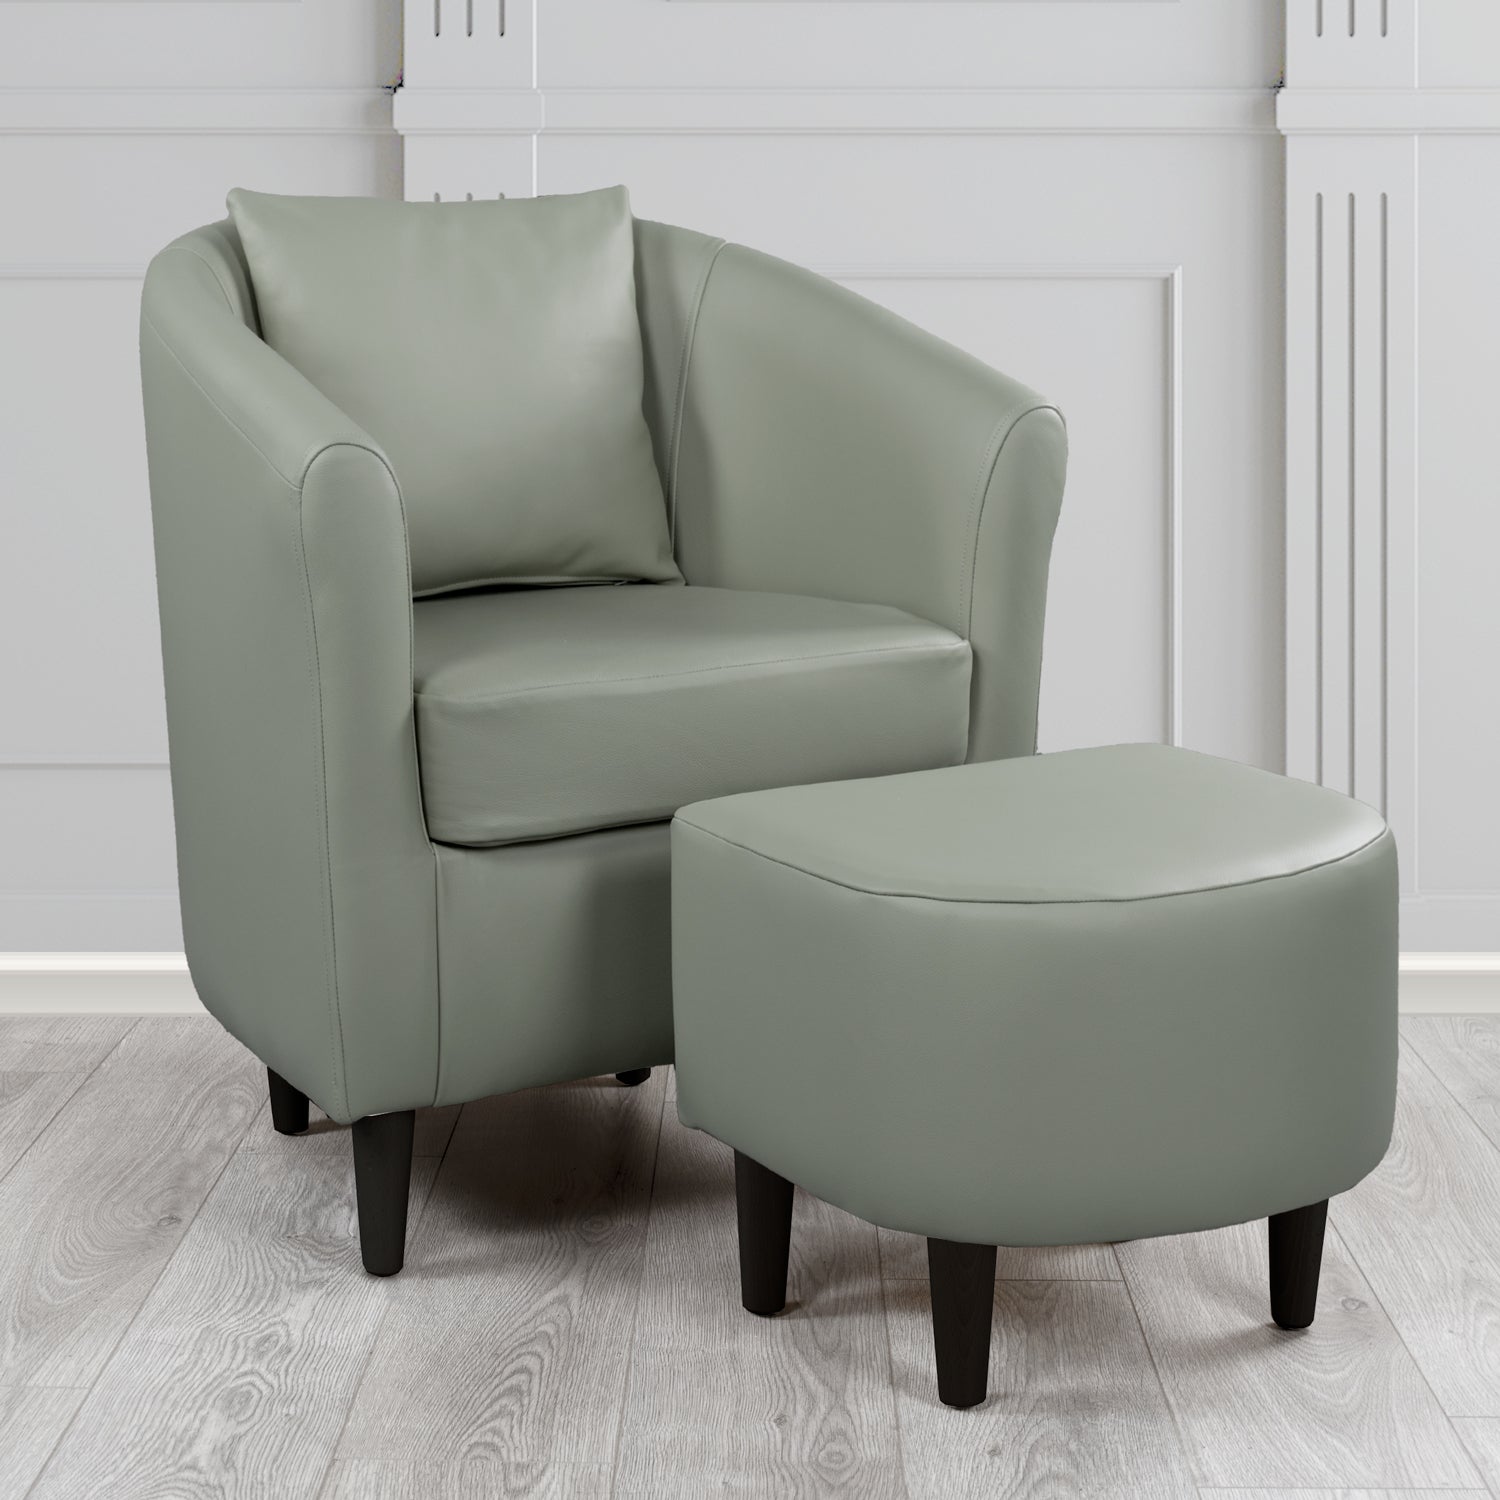 St Tropez Shelly Piping Crib 5 Genuine Leather Tub Chair & Footstool Set With Scatter Cushion (6619513520170)